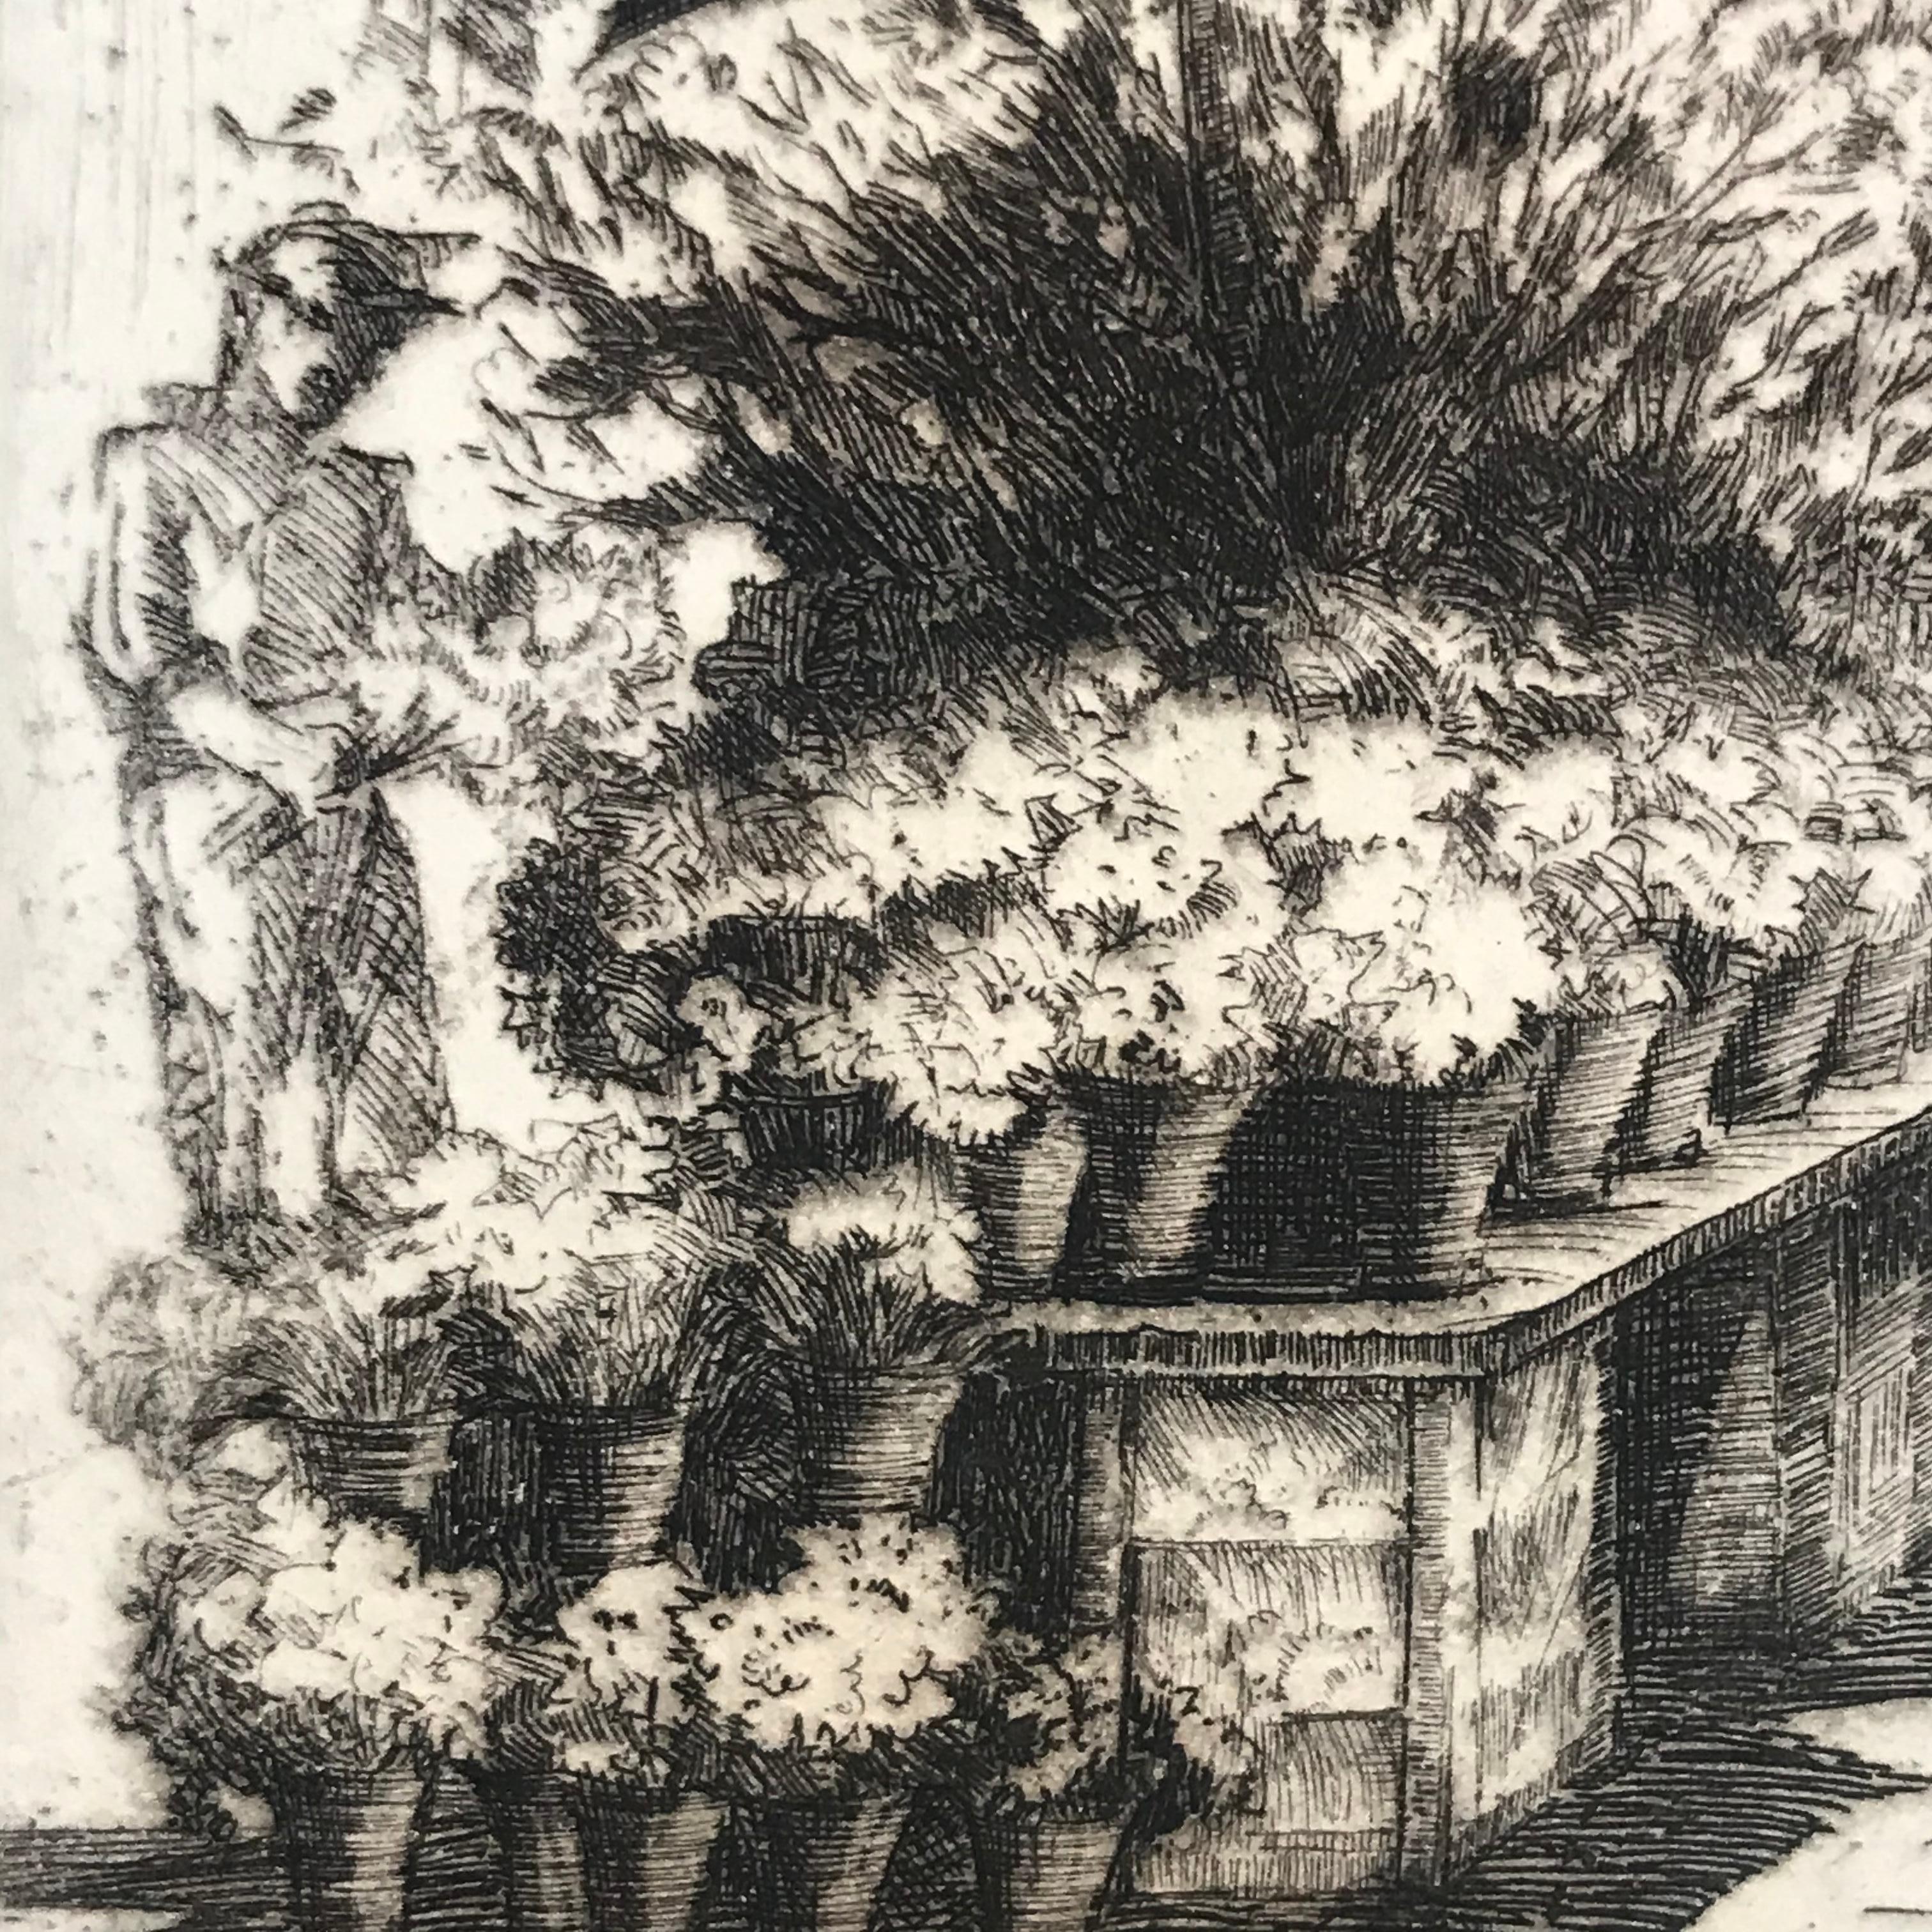 Original drypoint etching on archival paper of a flower stand in the 1930’s in San Francisco, California.  Titled in pencil lower left margin.  Signed in pencil lower right margin.  In very good condition. Sight size 6.5 by 4.25 inches. Sheet size 7